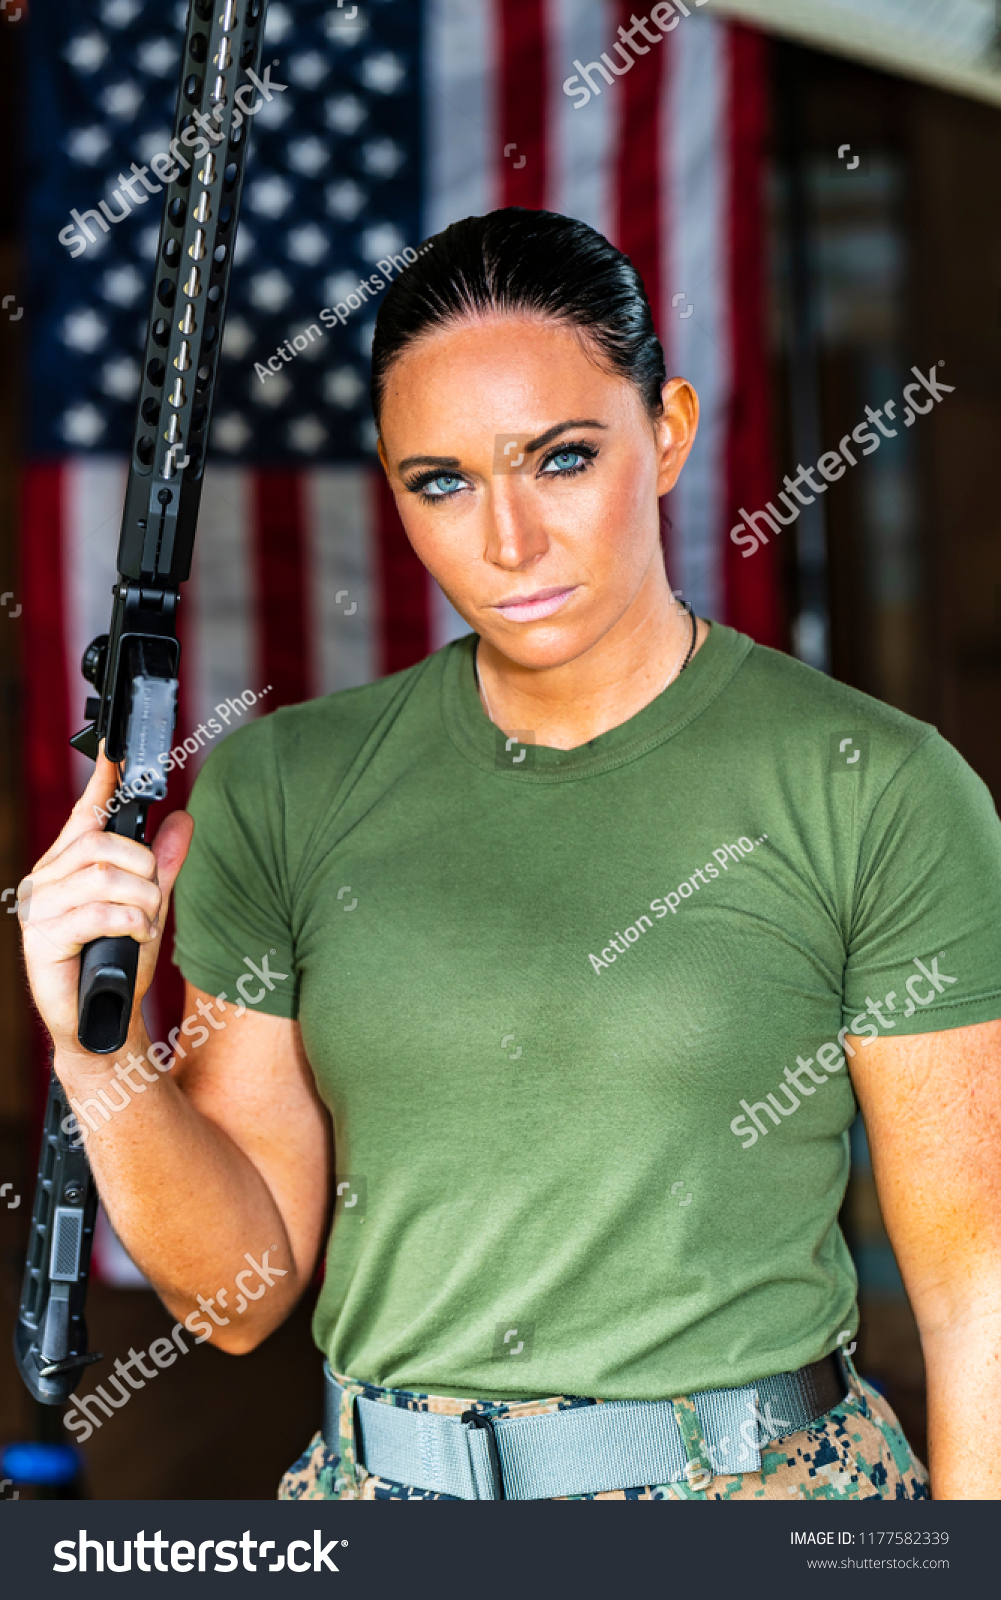 female military muscle